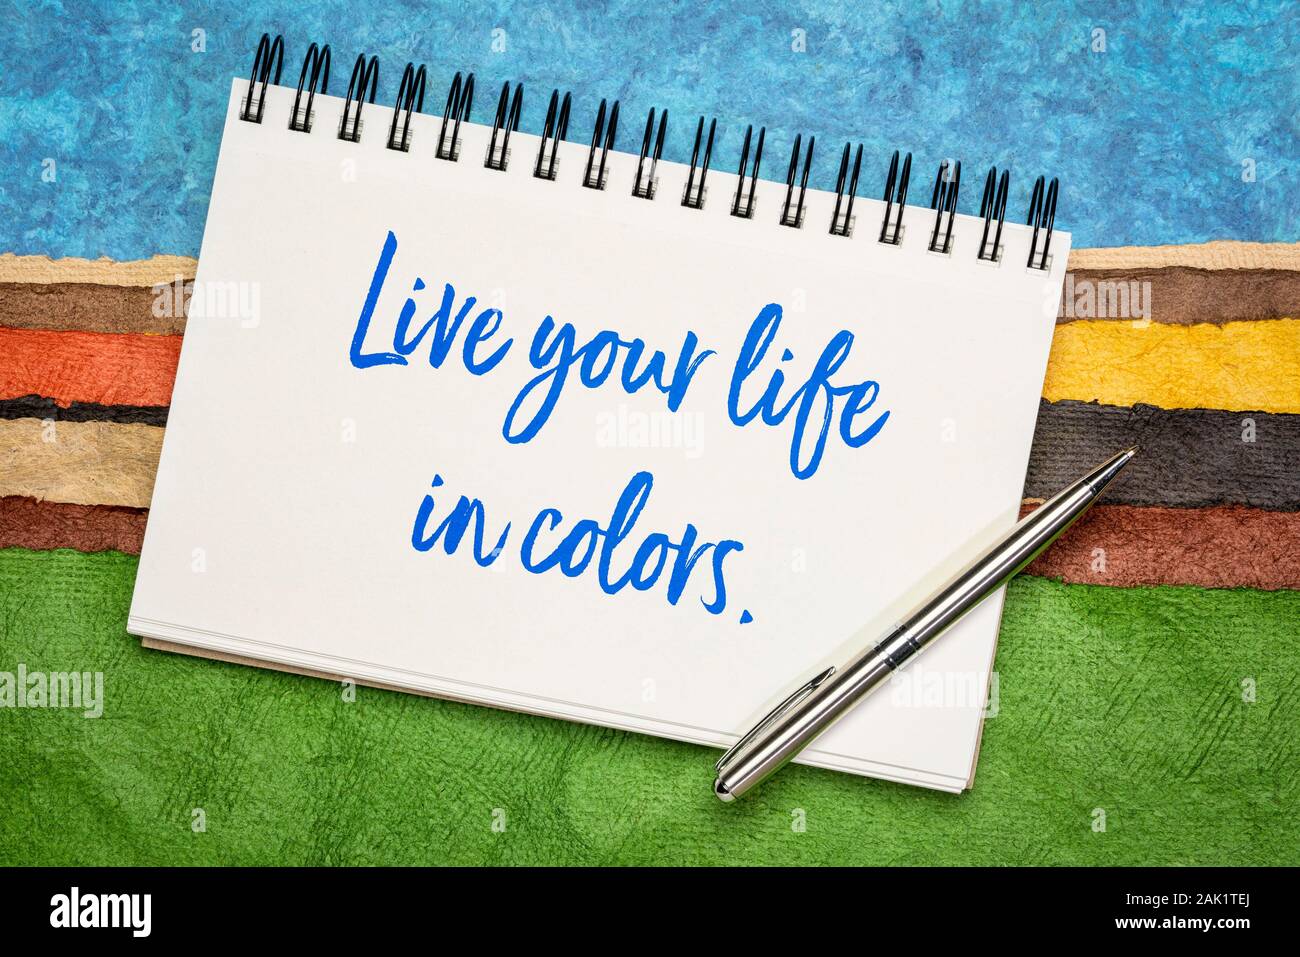 Live your life in colors inspirational quote - handwriting in a sketchbook against colorful abstract landscape. Happiness and positivity concept. Stock Photo